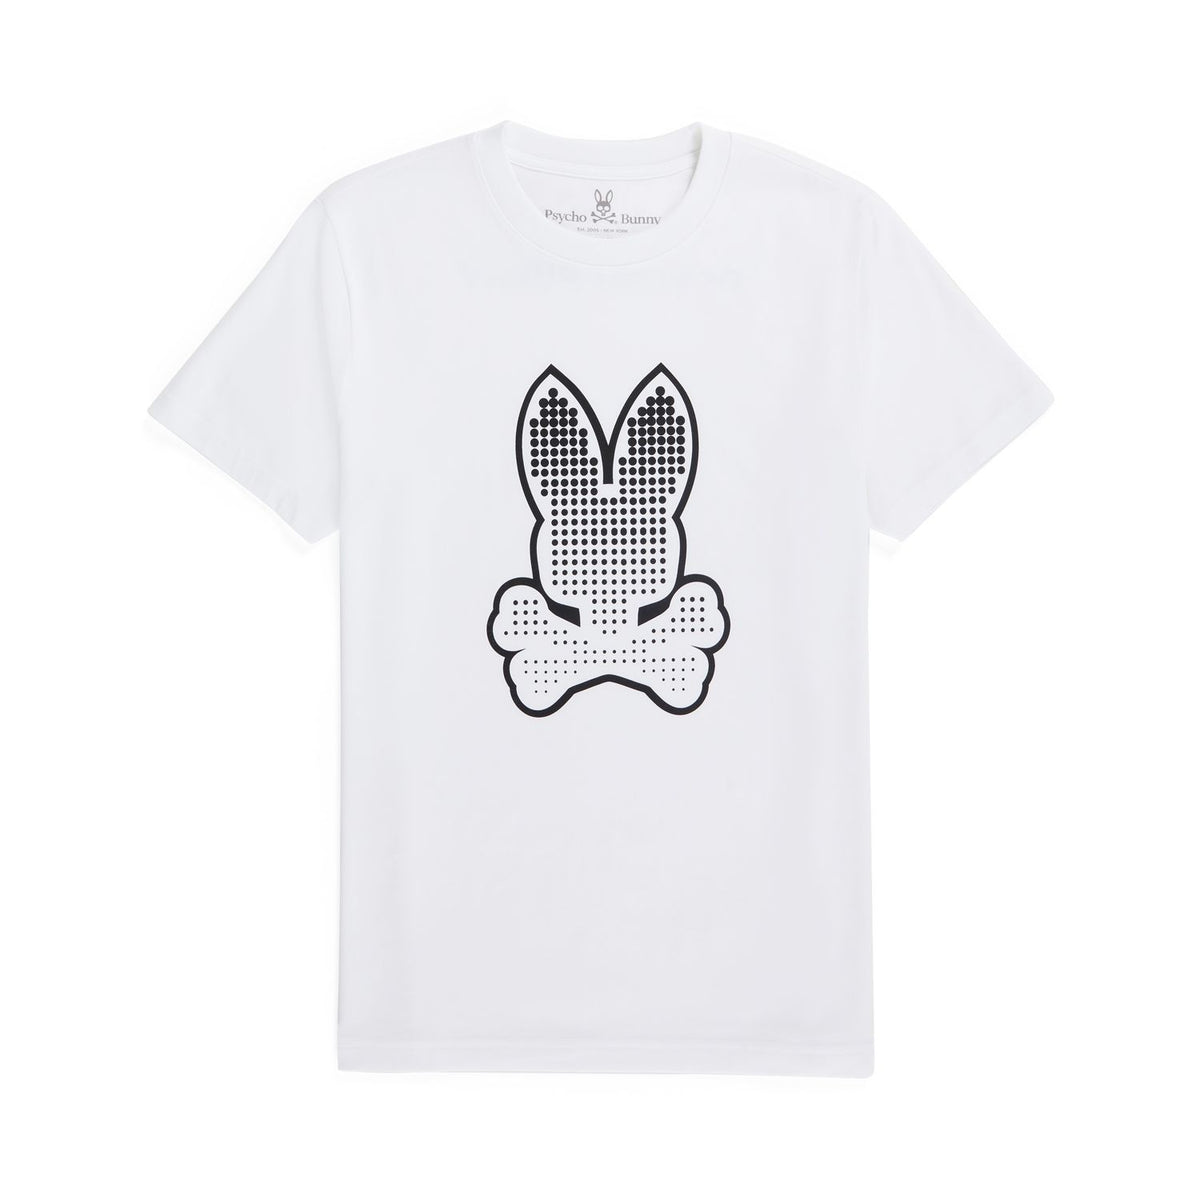 Psycho Bunny - Mens Strype Graphic Tee - White